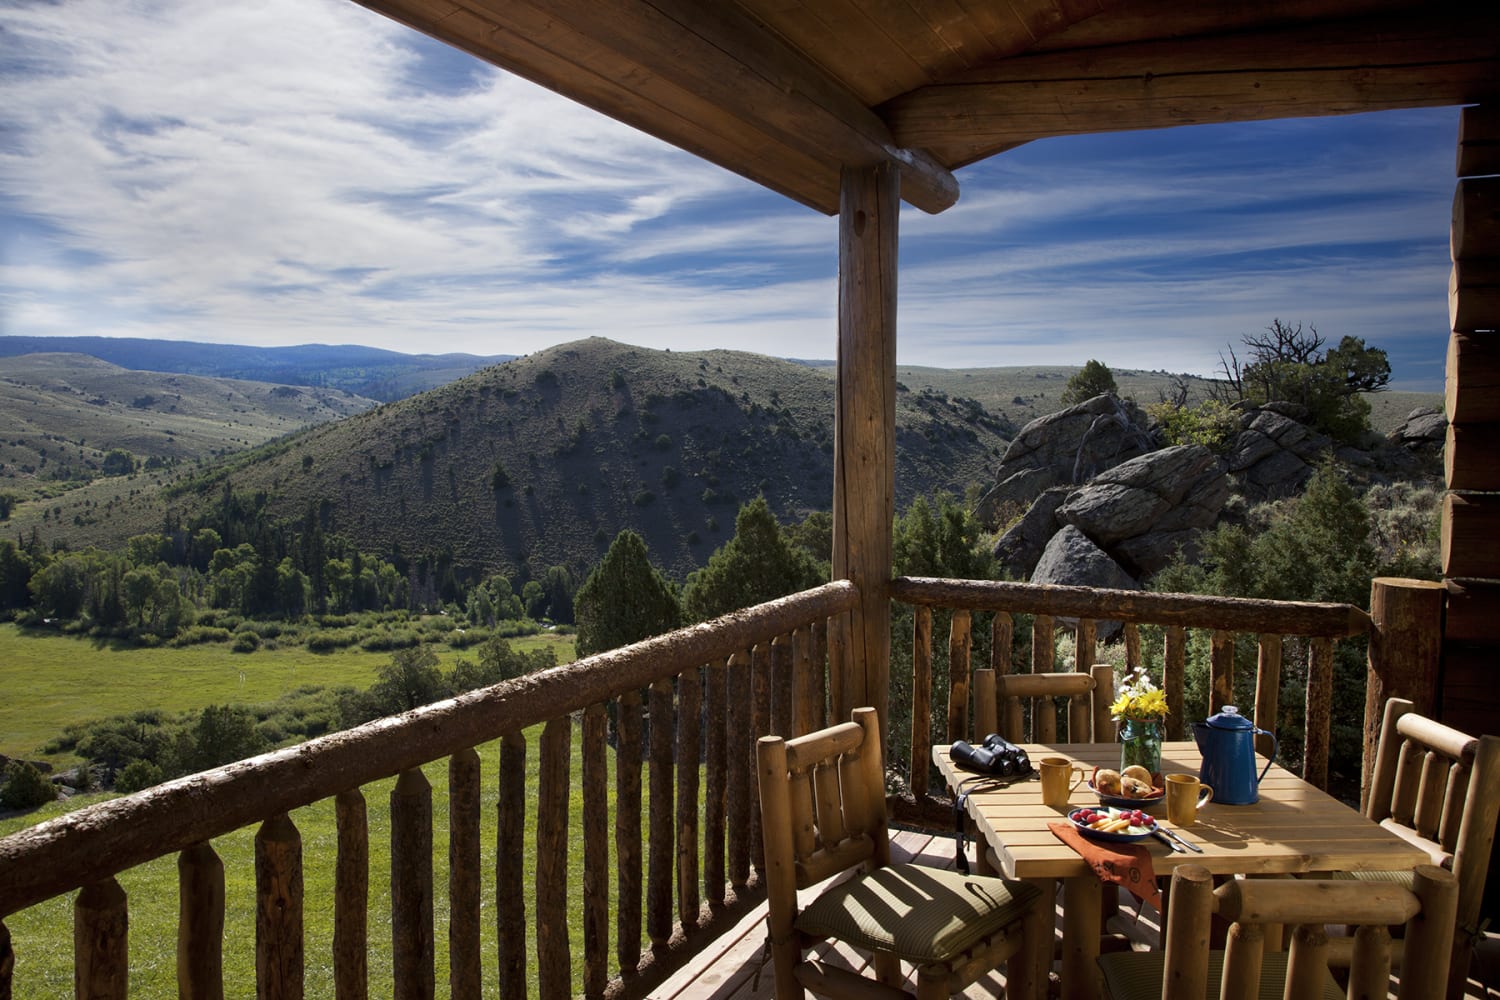 8 of the best romantic getaways in the United States